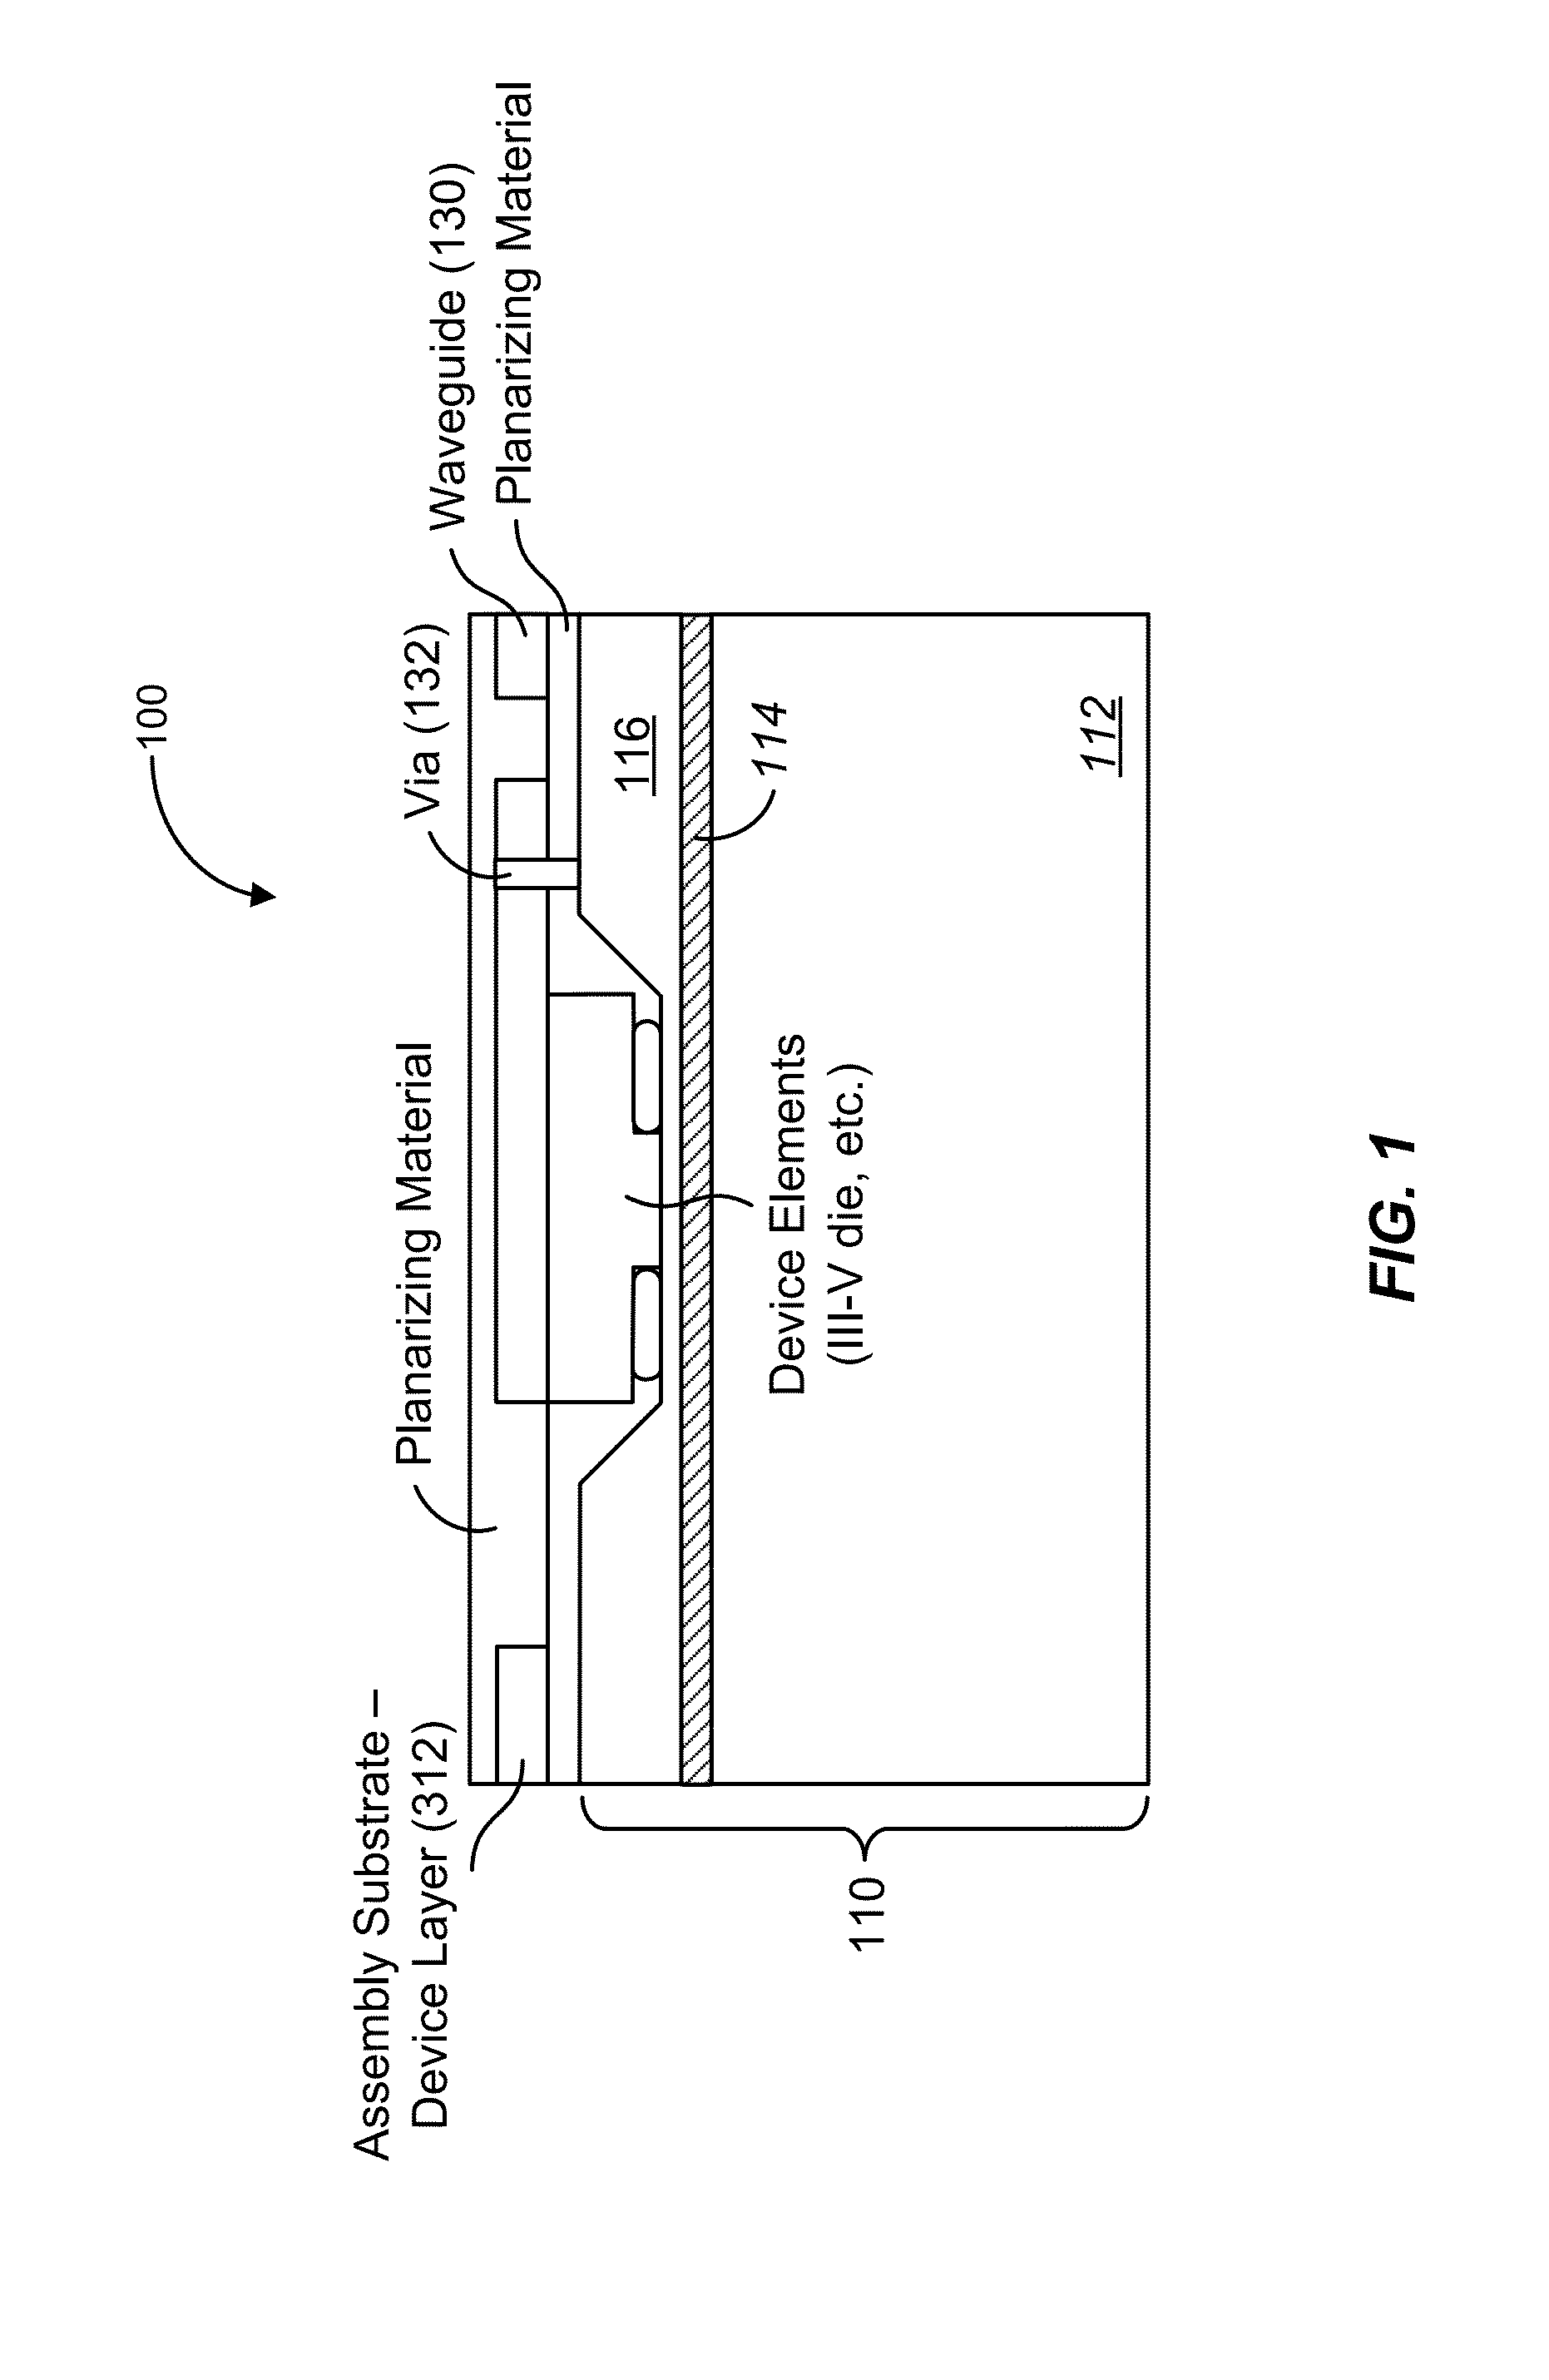 Method and system for template assisted wafer bonding using pedestals